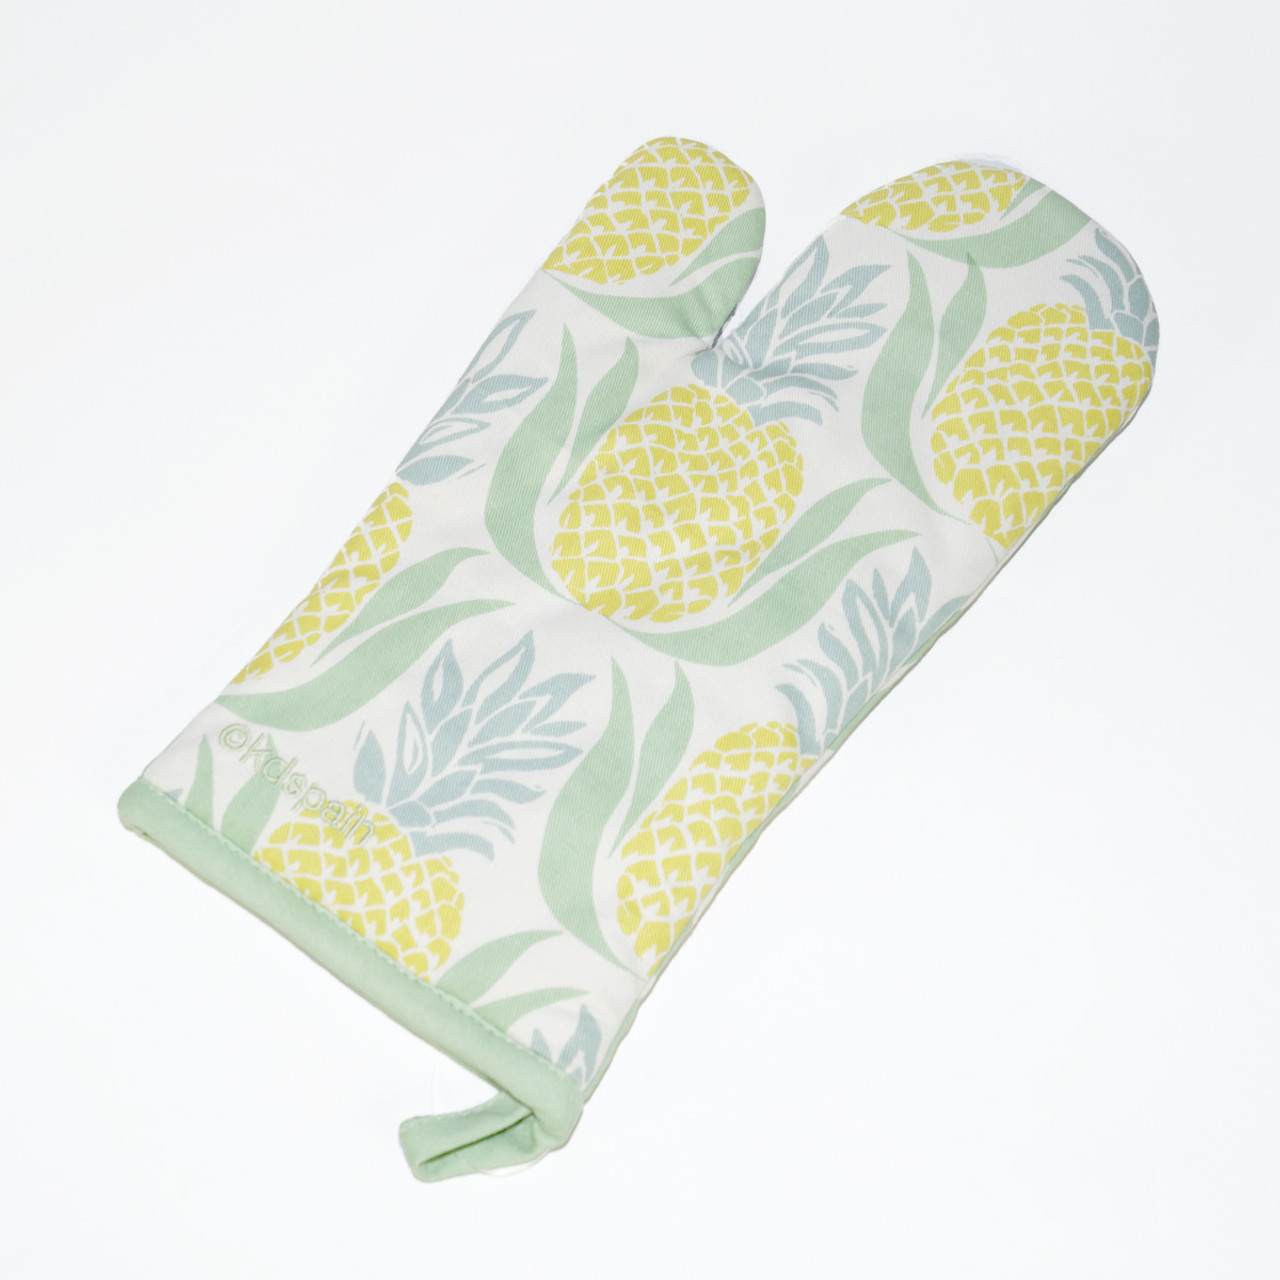 https://cdn11.bigcommerce.com/s-3vkhs5ezm3/images/stencil/1280x1280/products/1510/4998/Welcome-Pineapple-Oven-Mitt__S_1__31841.1617654335.jpg?c=1